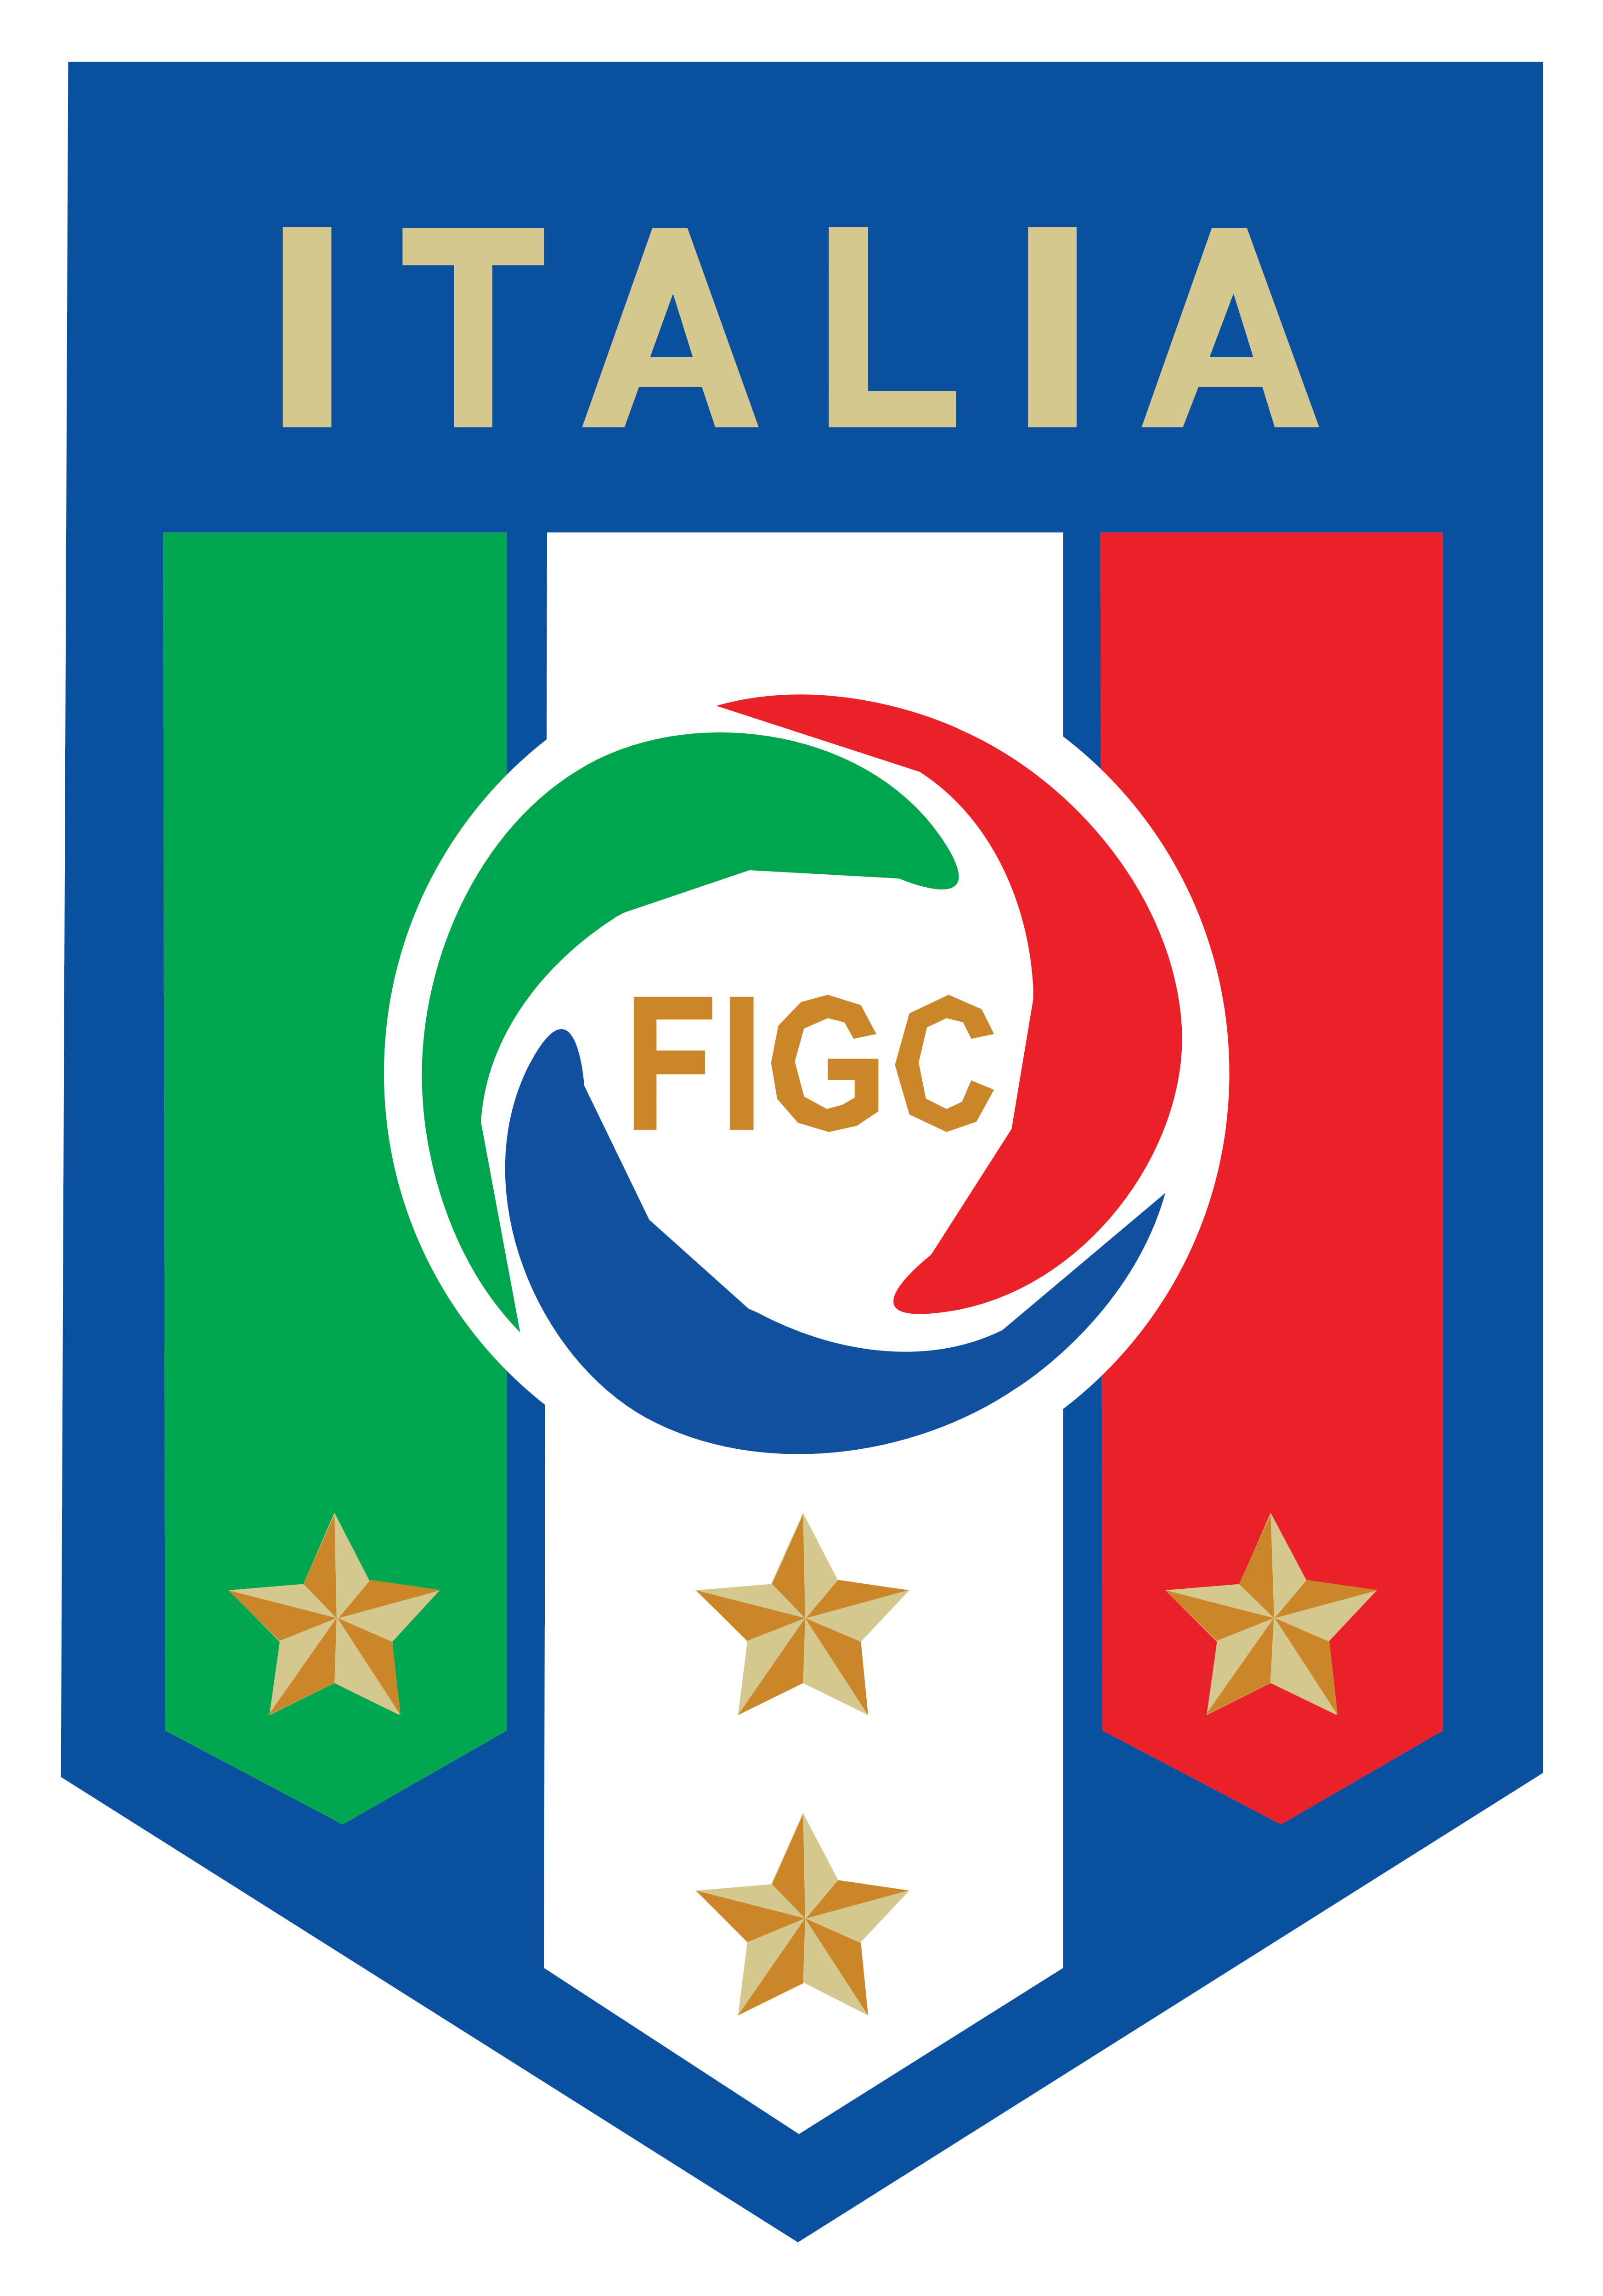 Italy_national_football_team_logo_crest.png